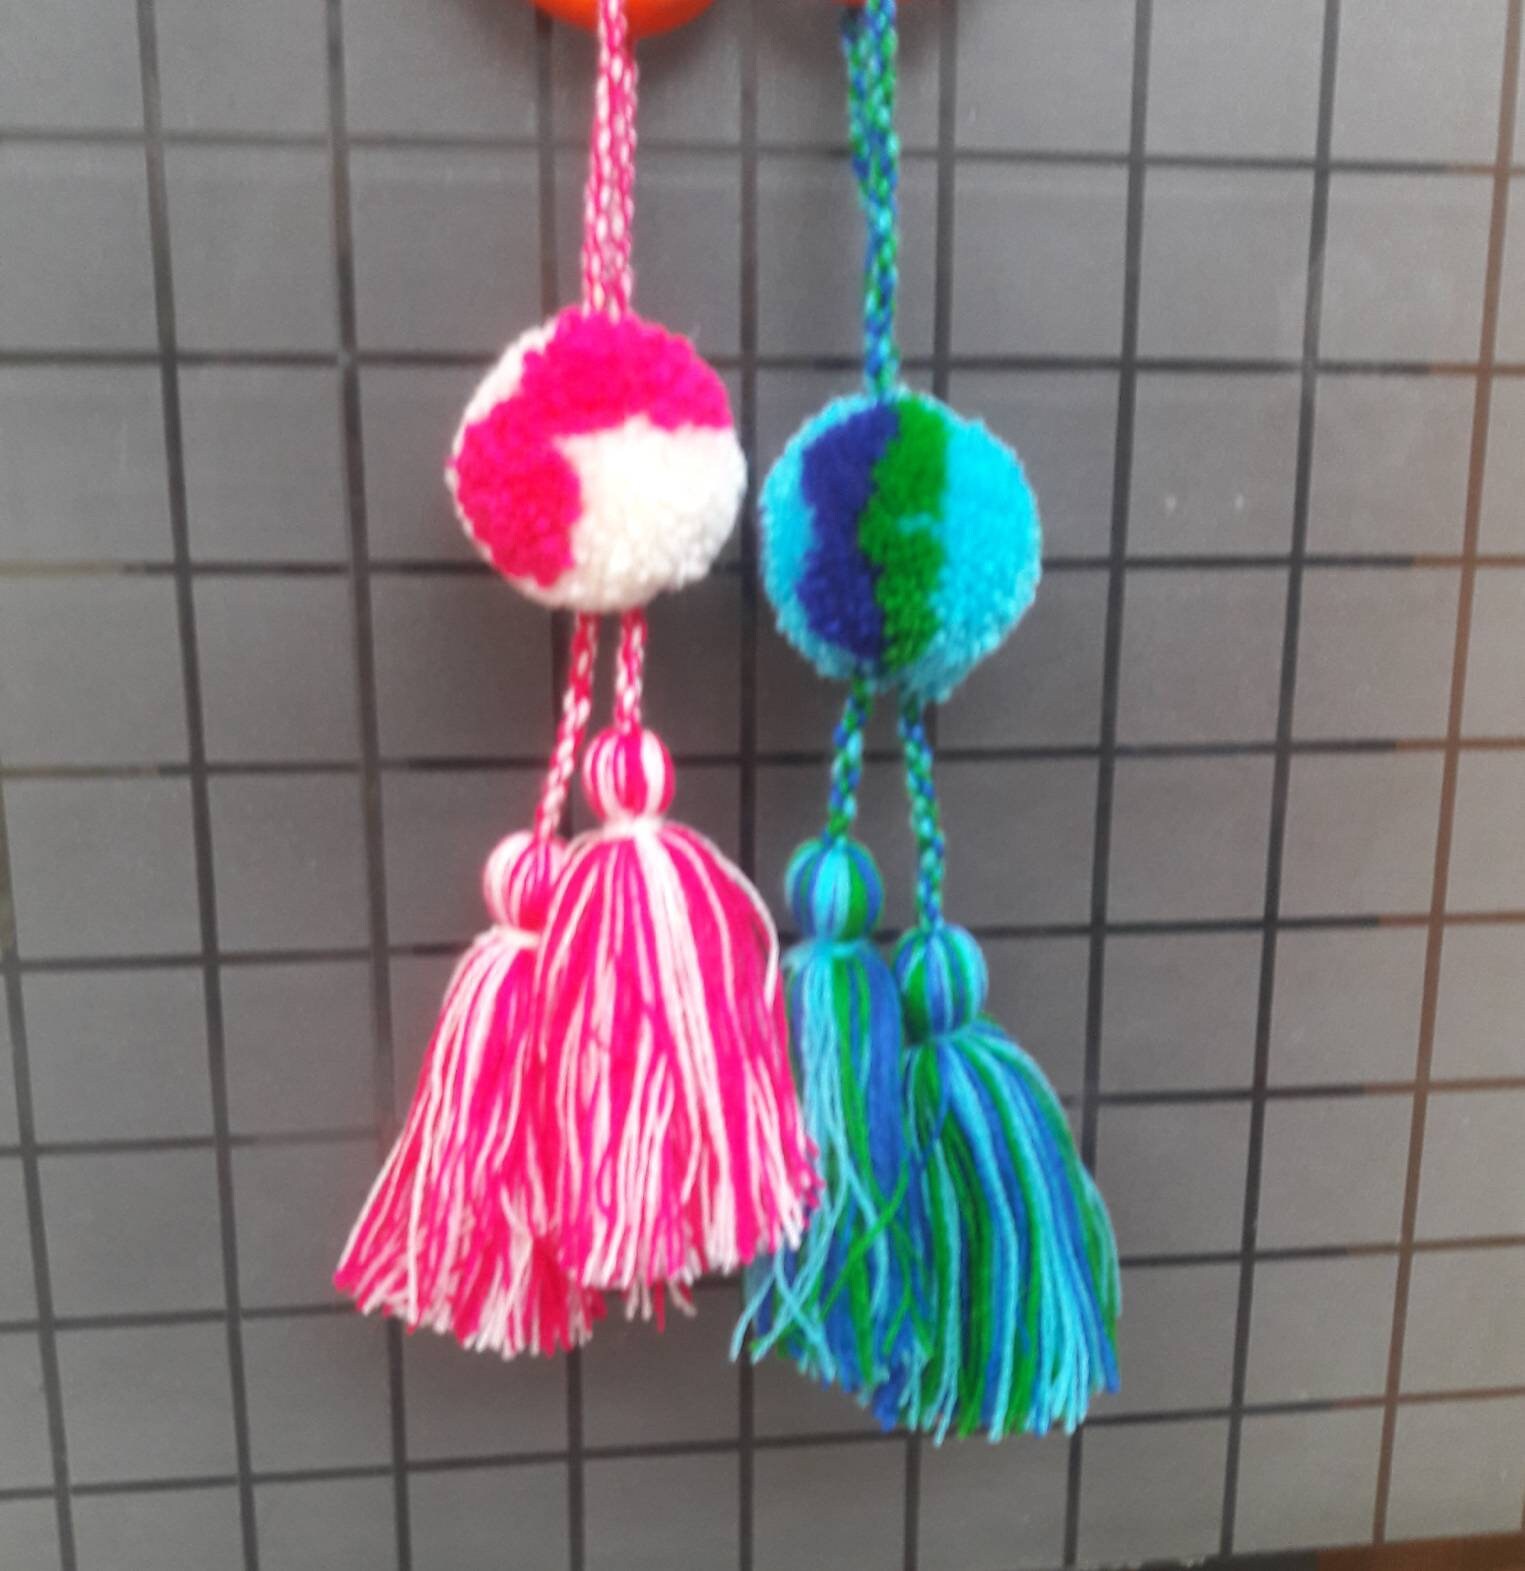 Pink and blue fabric bag charms, Tassels charms, Bag Accessory, door  hangings, home Decoration, tote bag charms, car mirror hanging charm